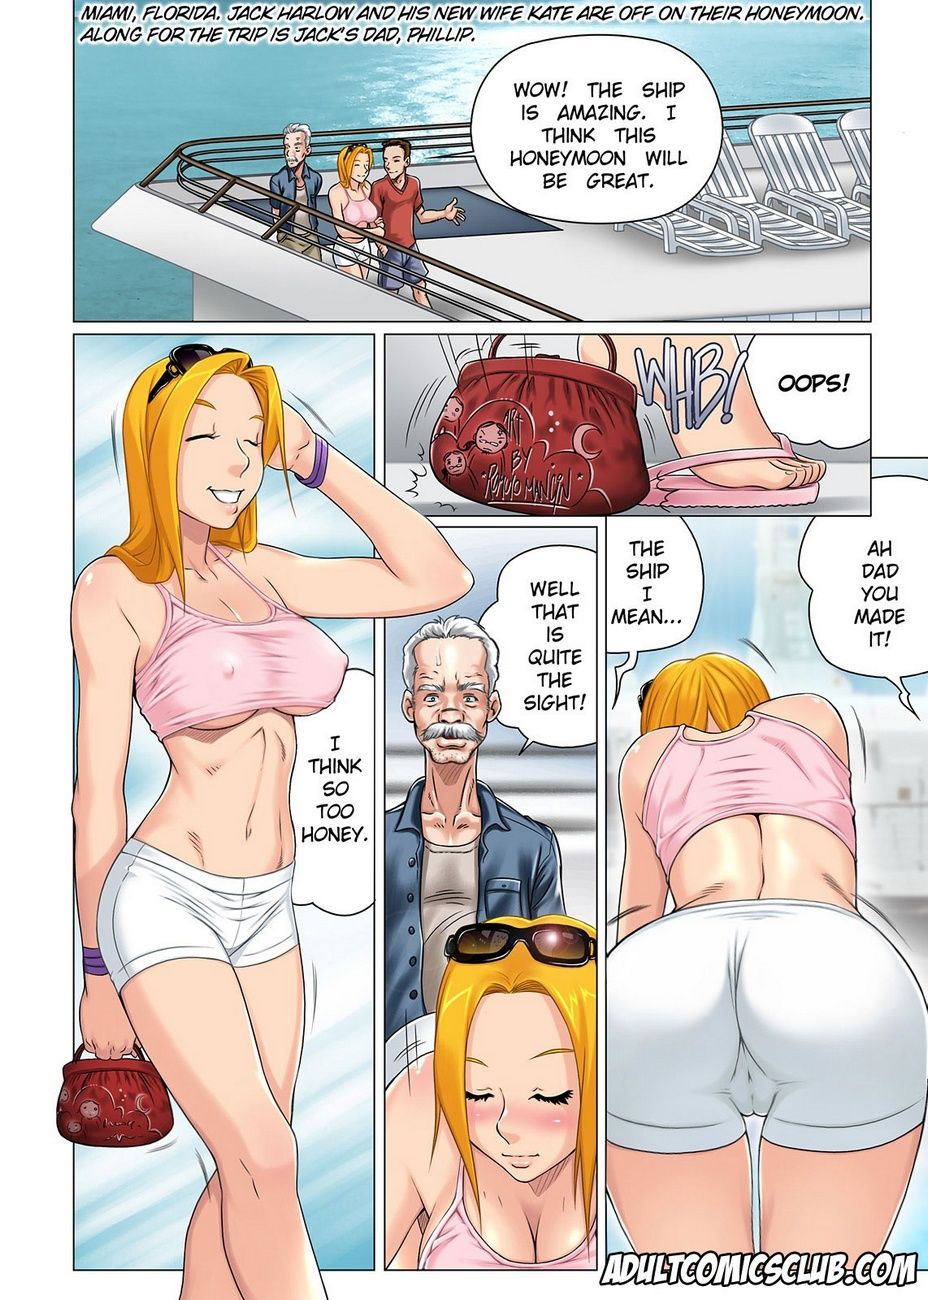 Another Horny Father In Law page 2